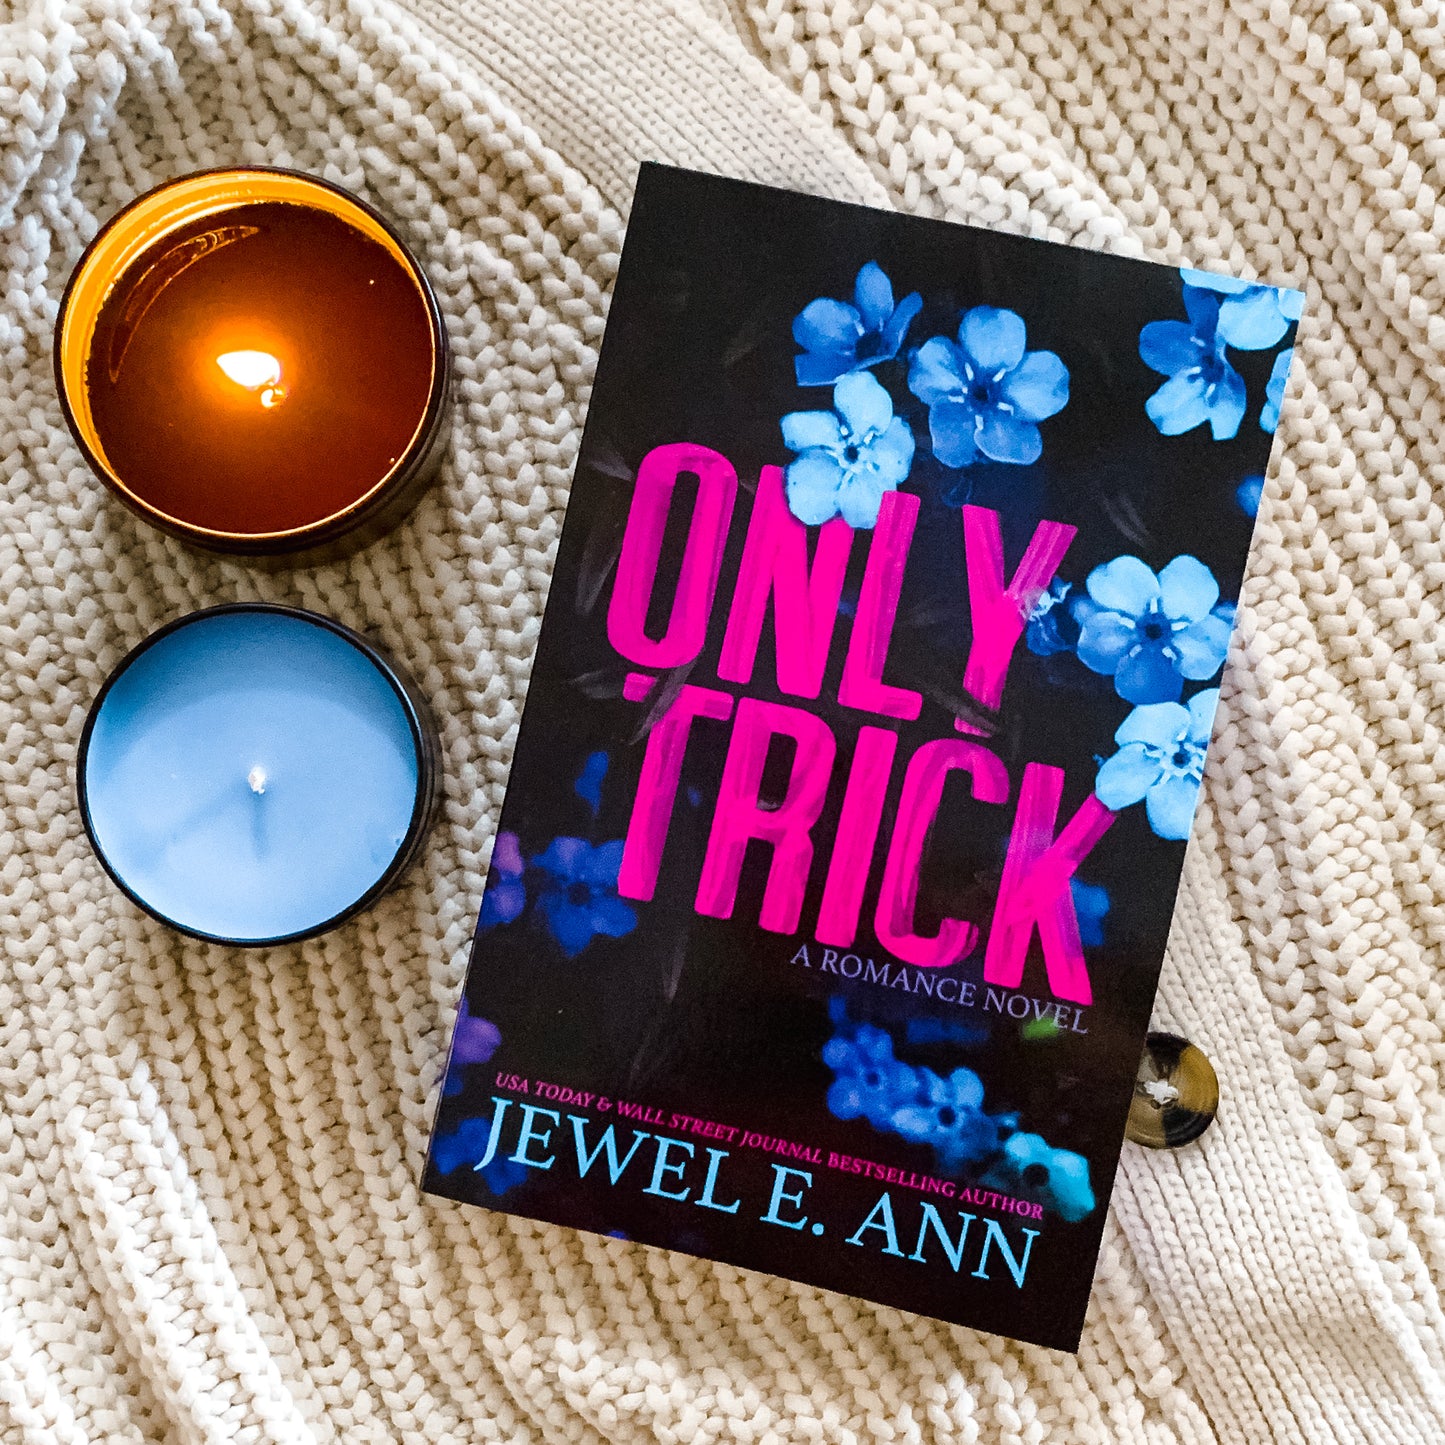 Only Trick by Jewel E Ann